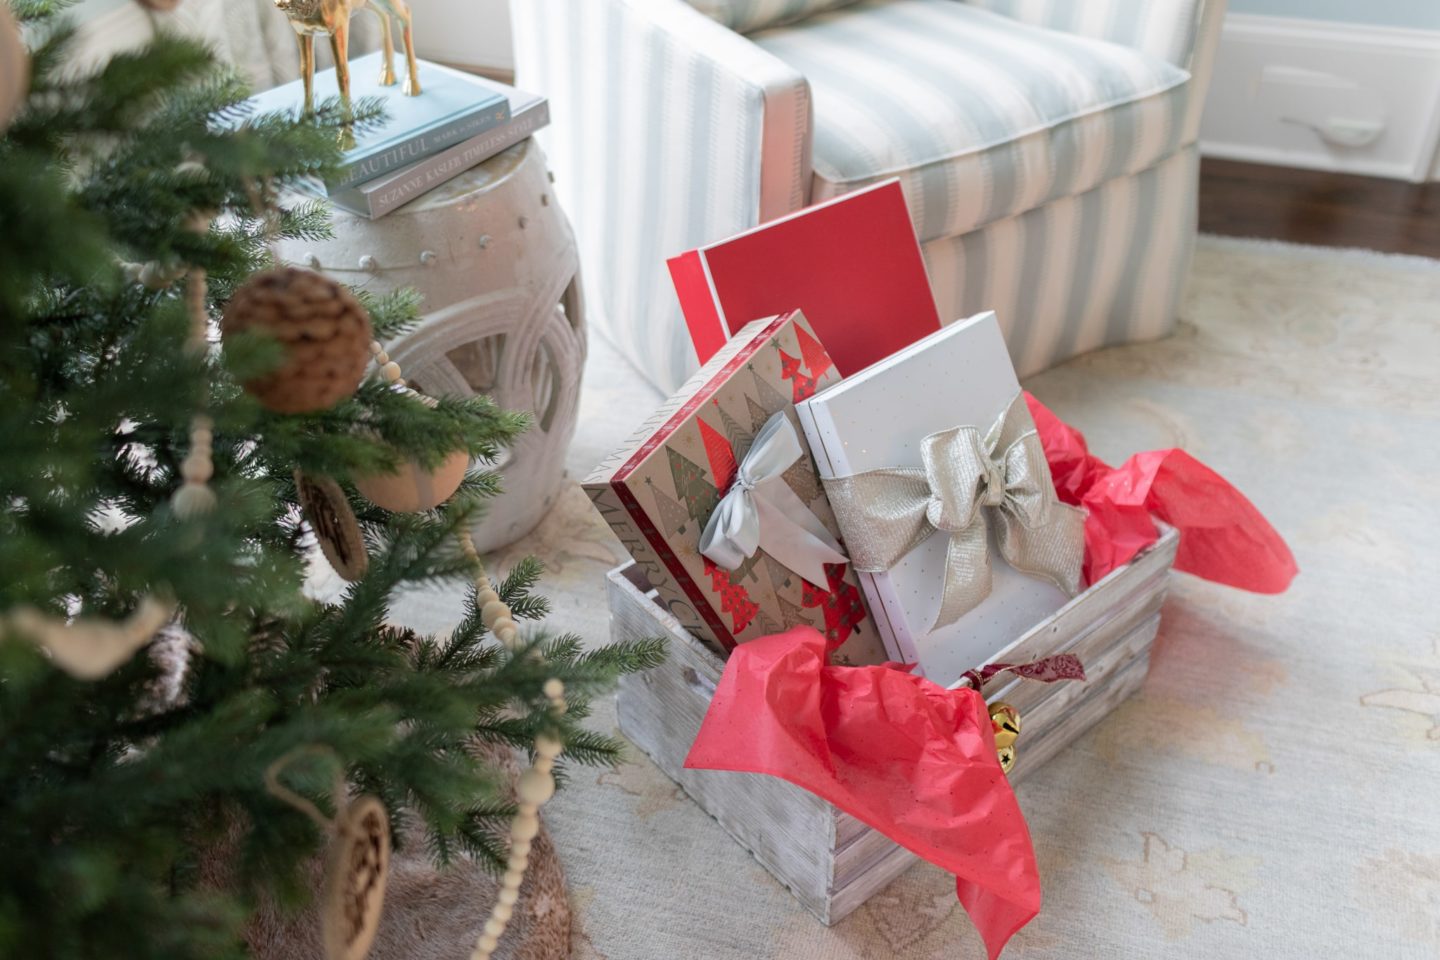 Rustic wrapped gifts under the wooden Christmas tree